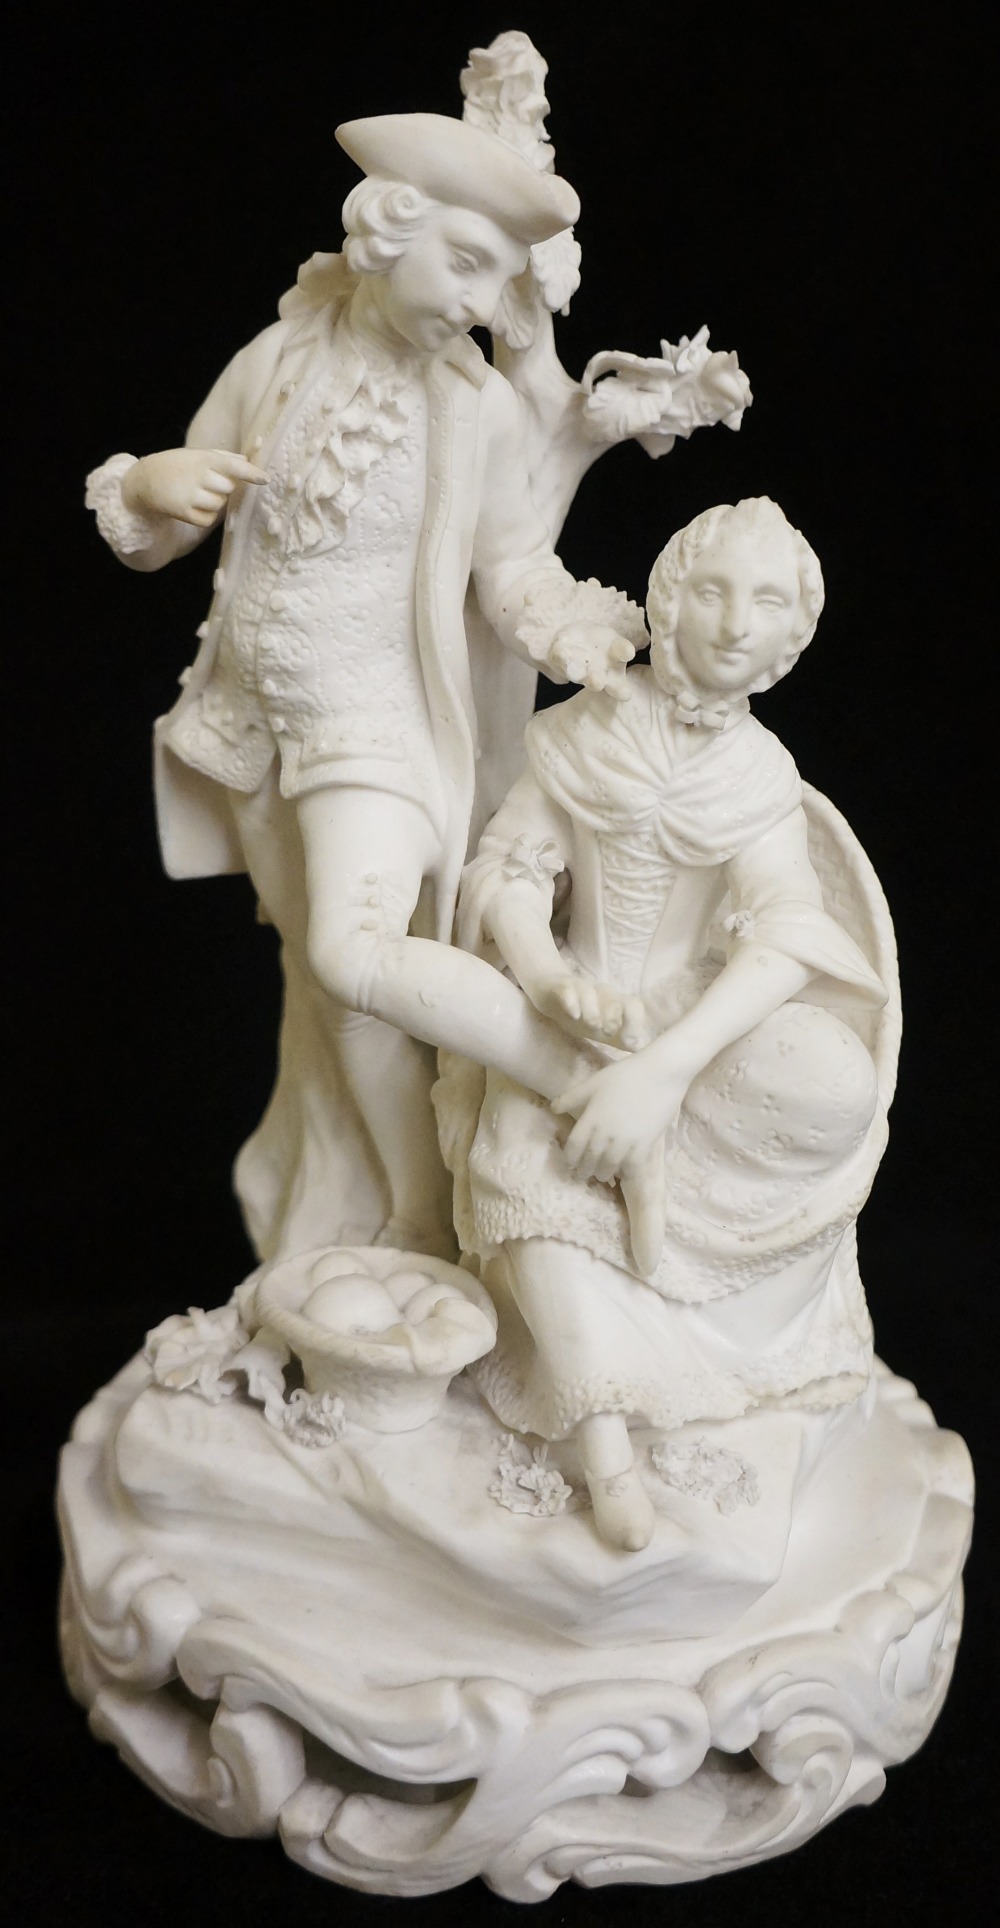 A Derby biscuit porcelain figure of a gallant and his companion in 18th Century attire,